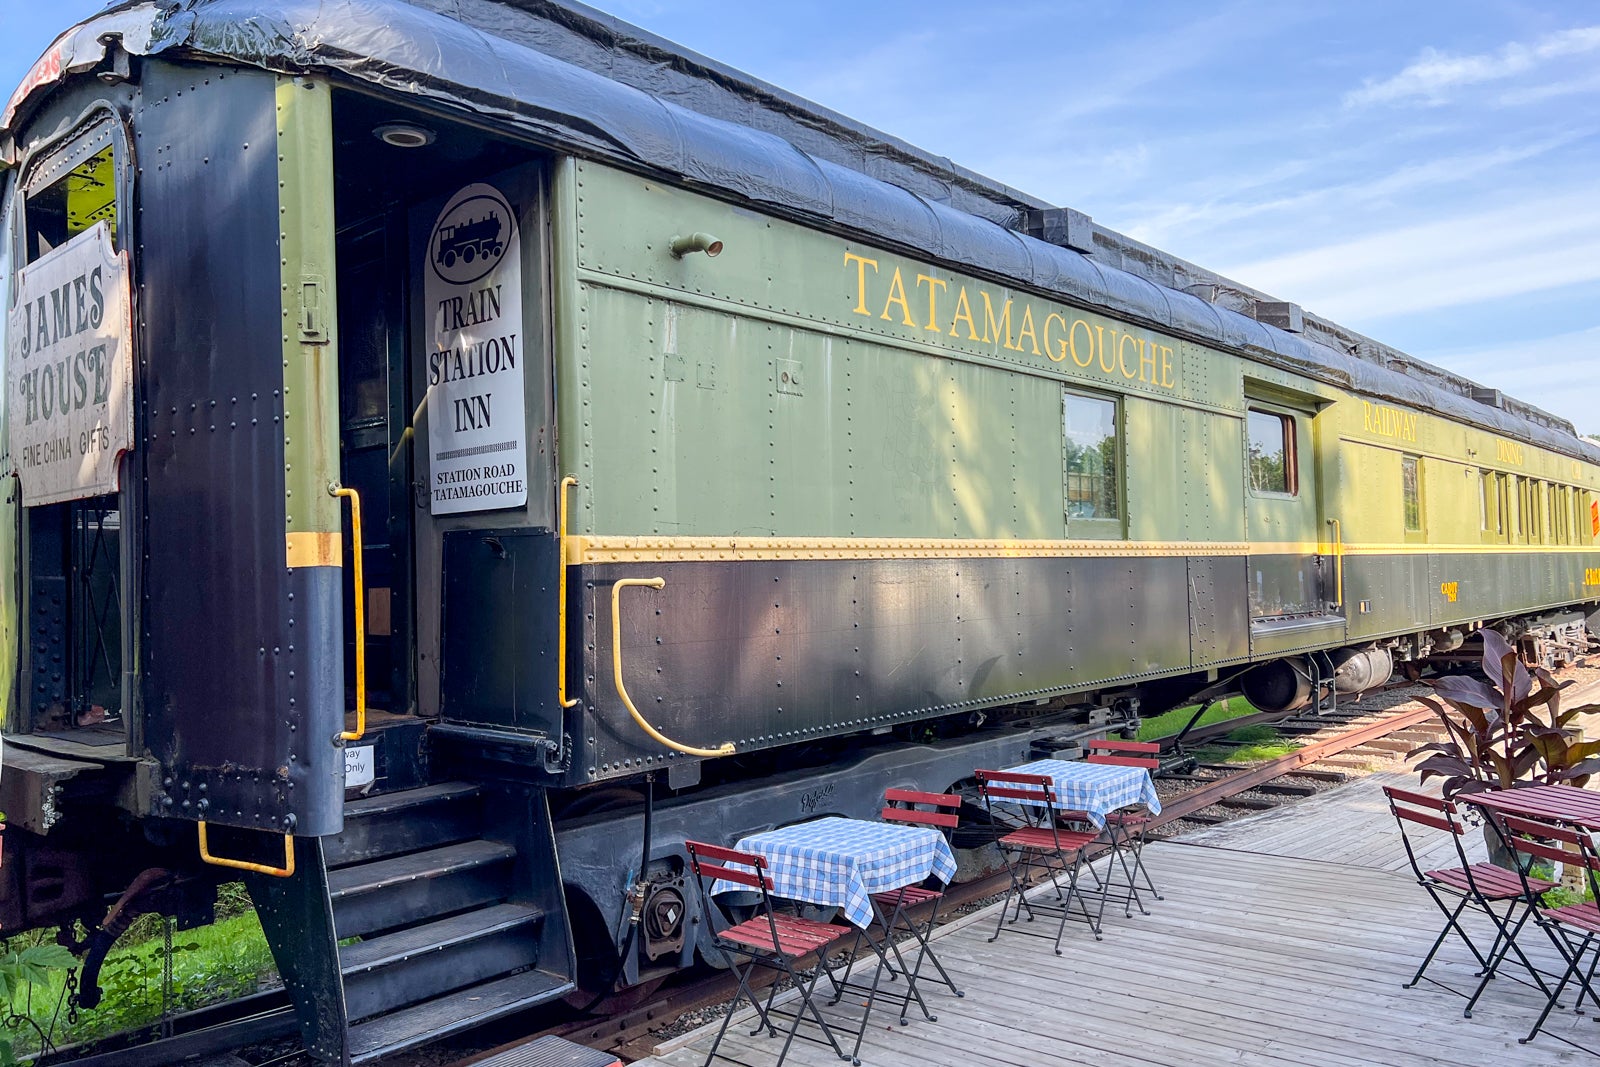 The outside of the dining car at the Train Station Inn in Tatamagouche, Nova Scotia